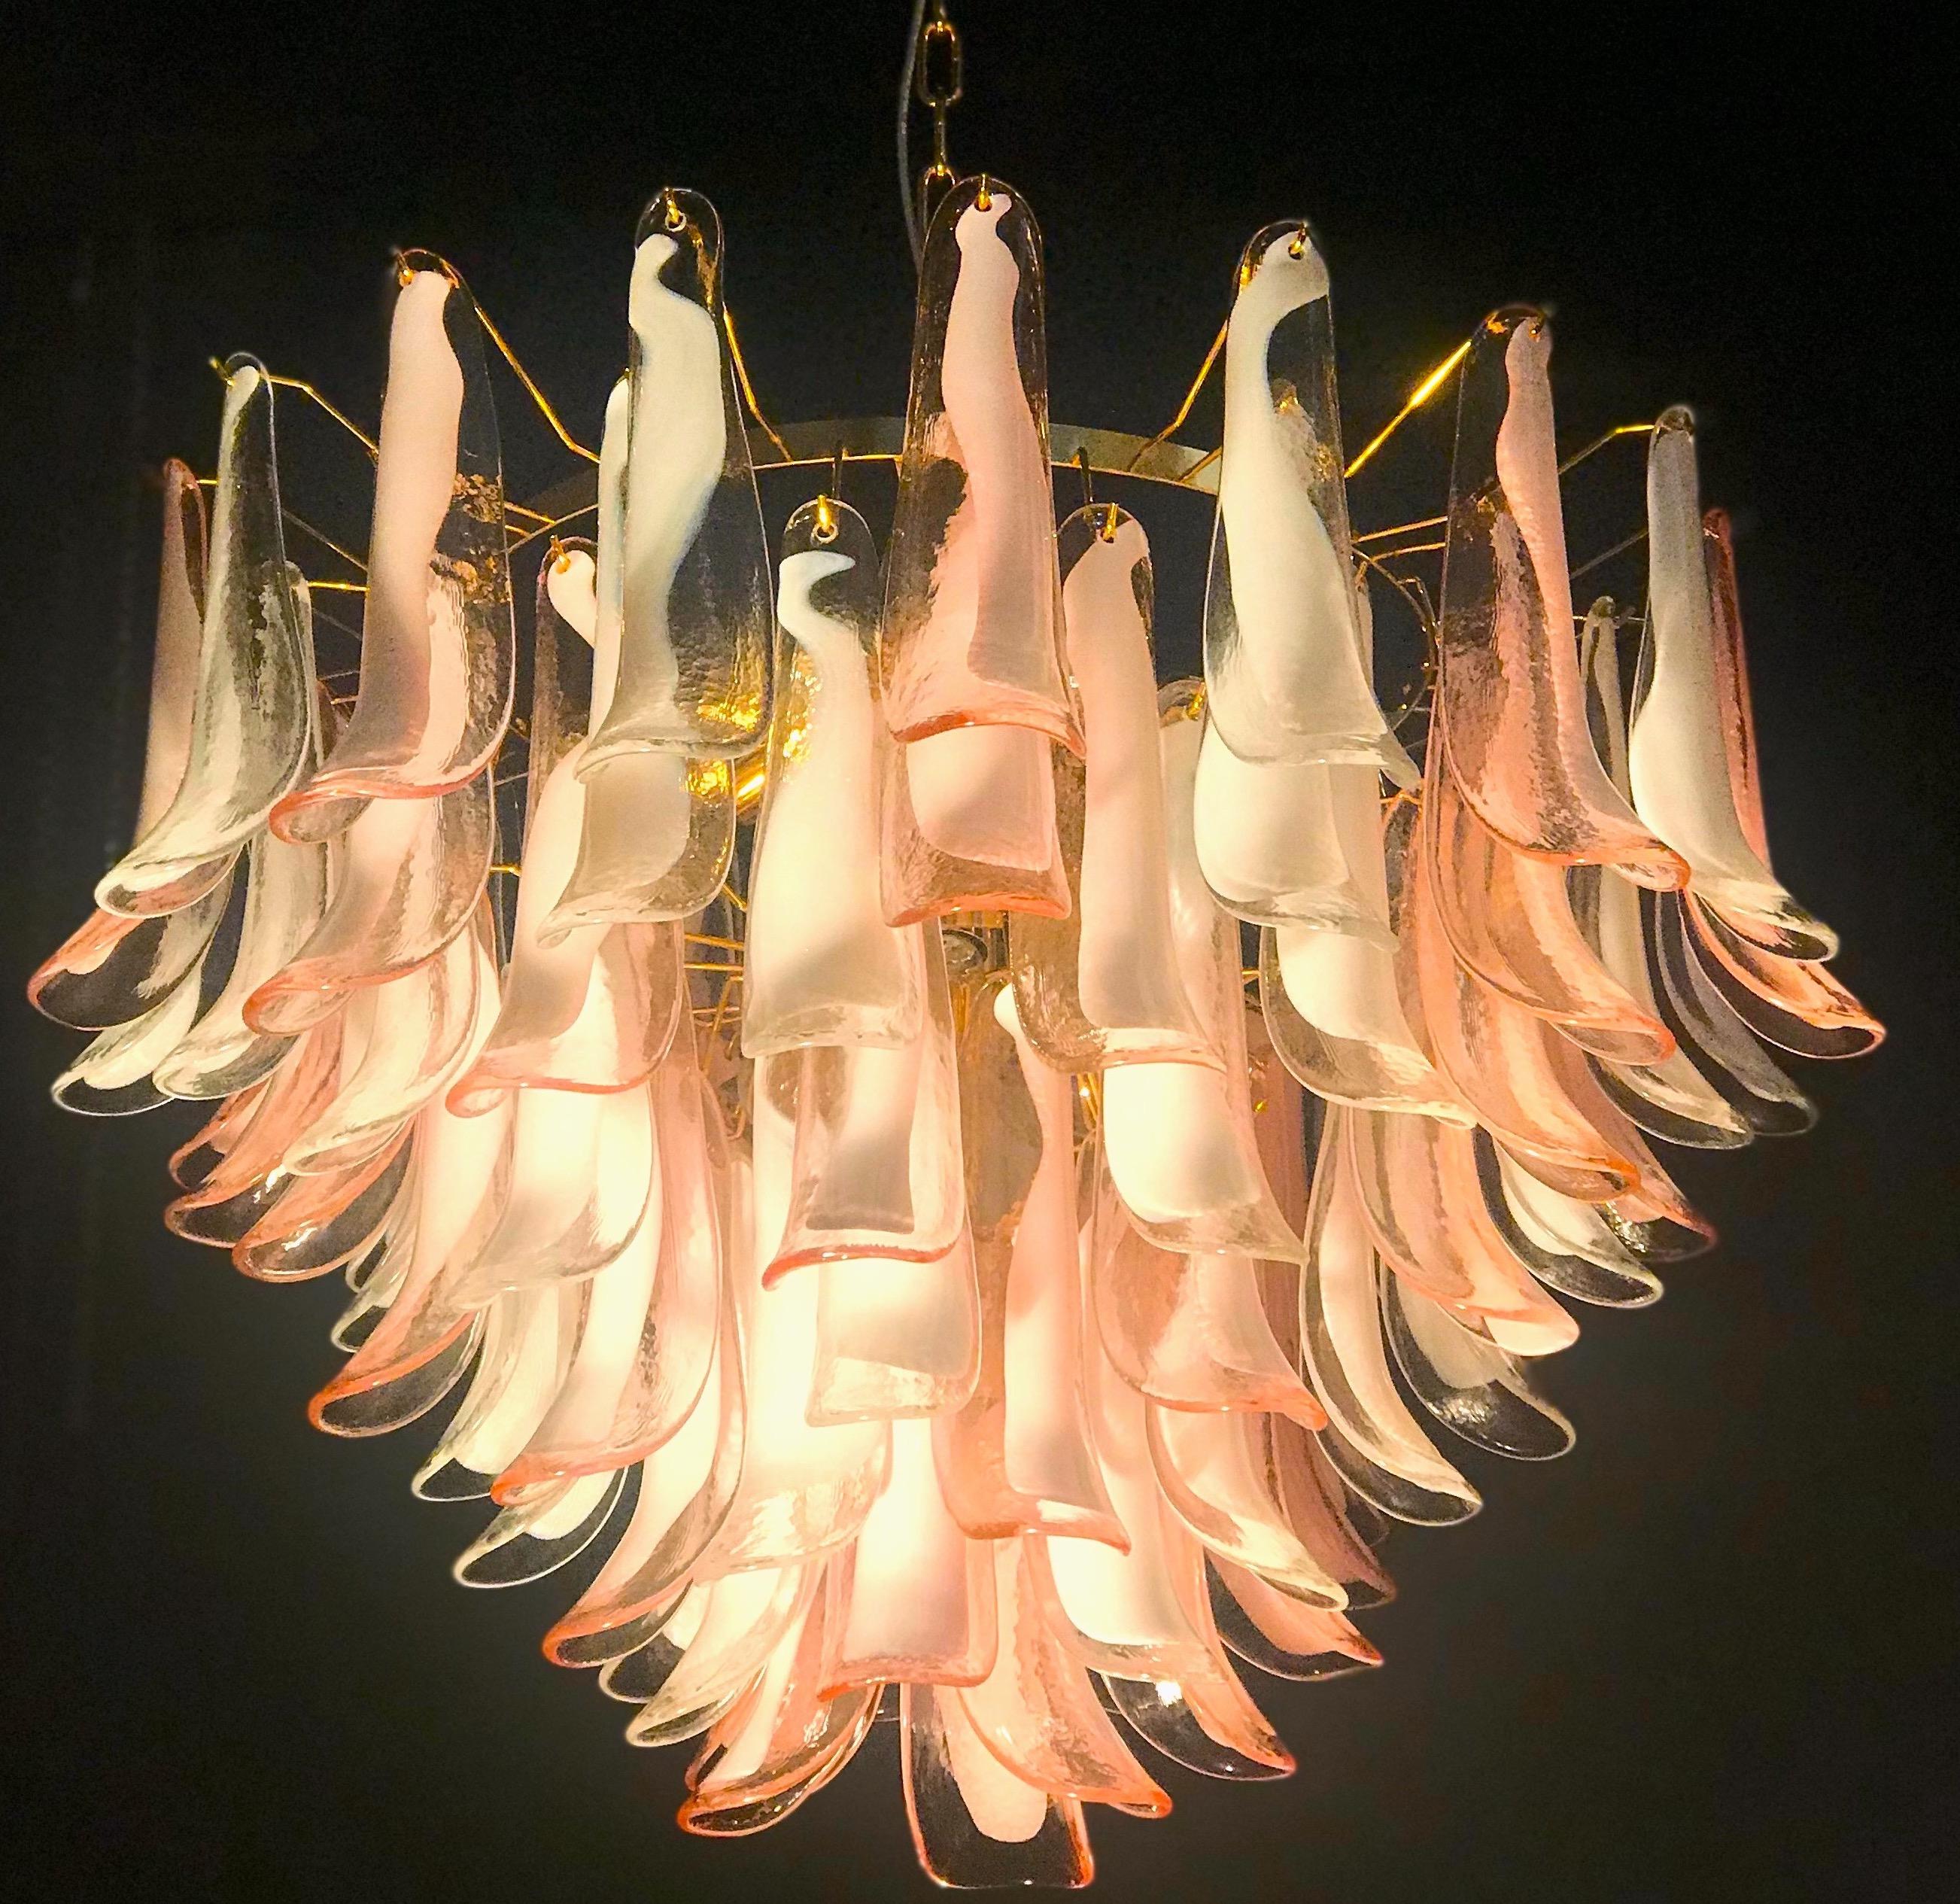 Fabulous Italian chandelier made by 90 pink and white lattimo Murano glass petals supported by a brass frame by  Veneziani Arte .
We can customize the frame, brass or chrome. 
Price is for one item. 

Dimensions: 51.20 inches (130 cm) height with